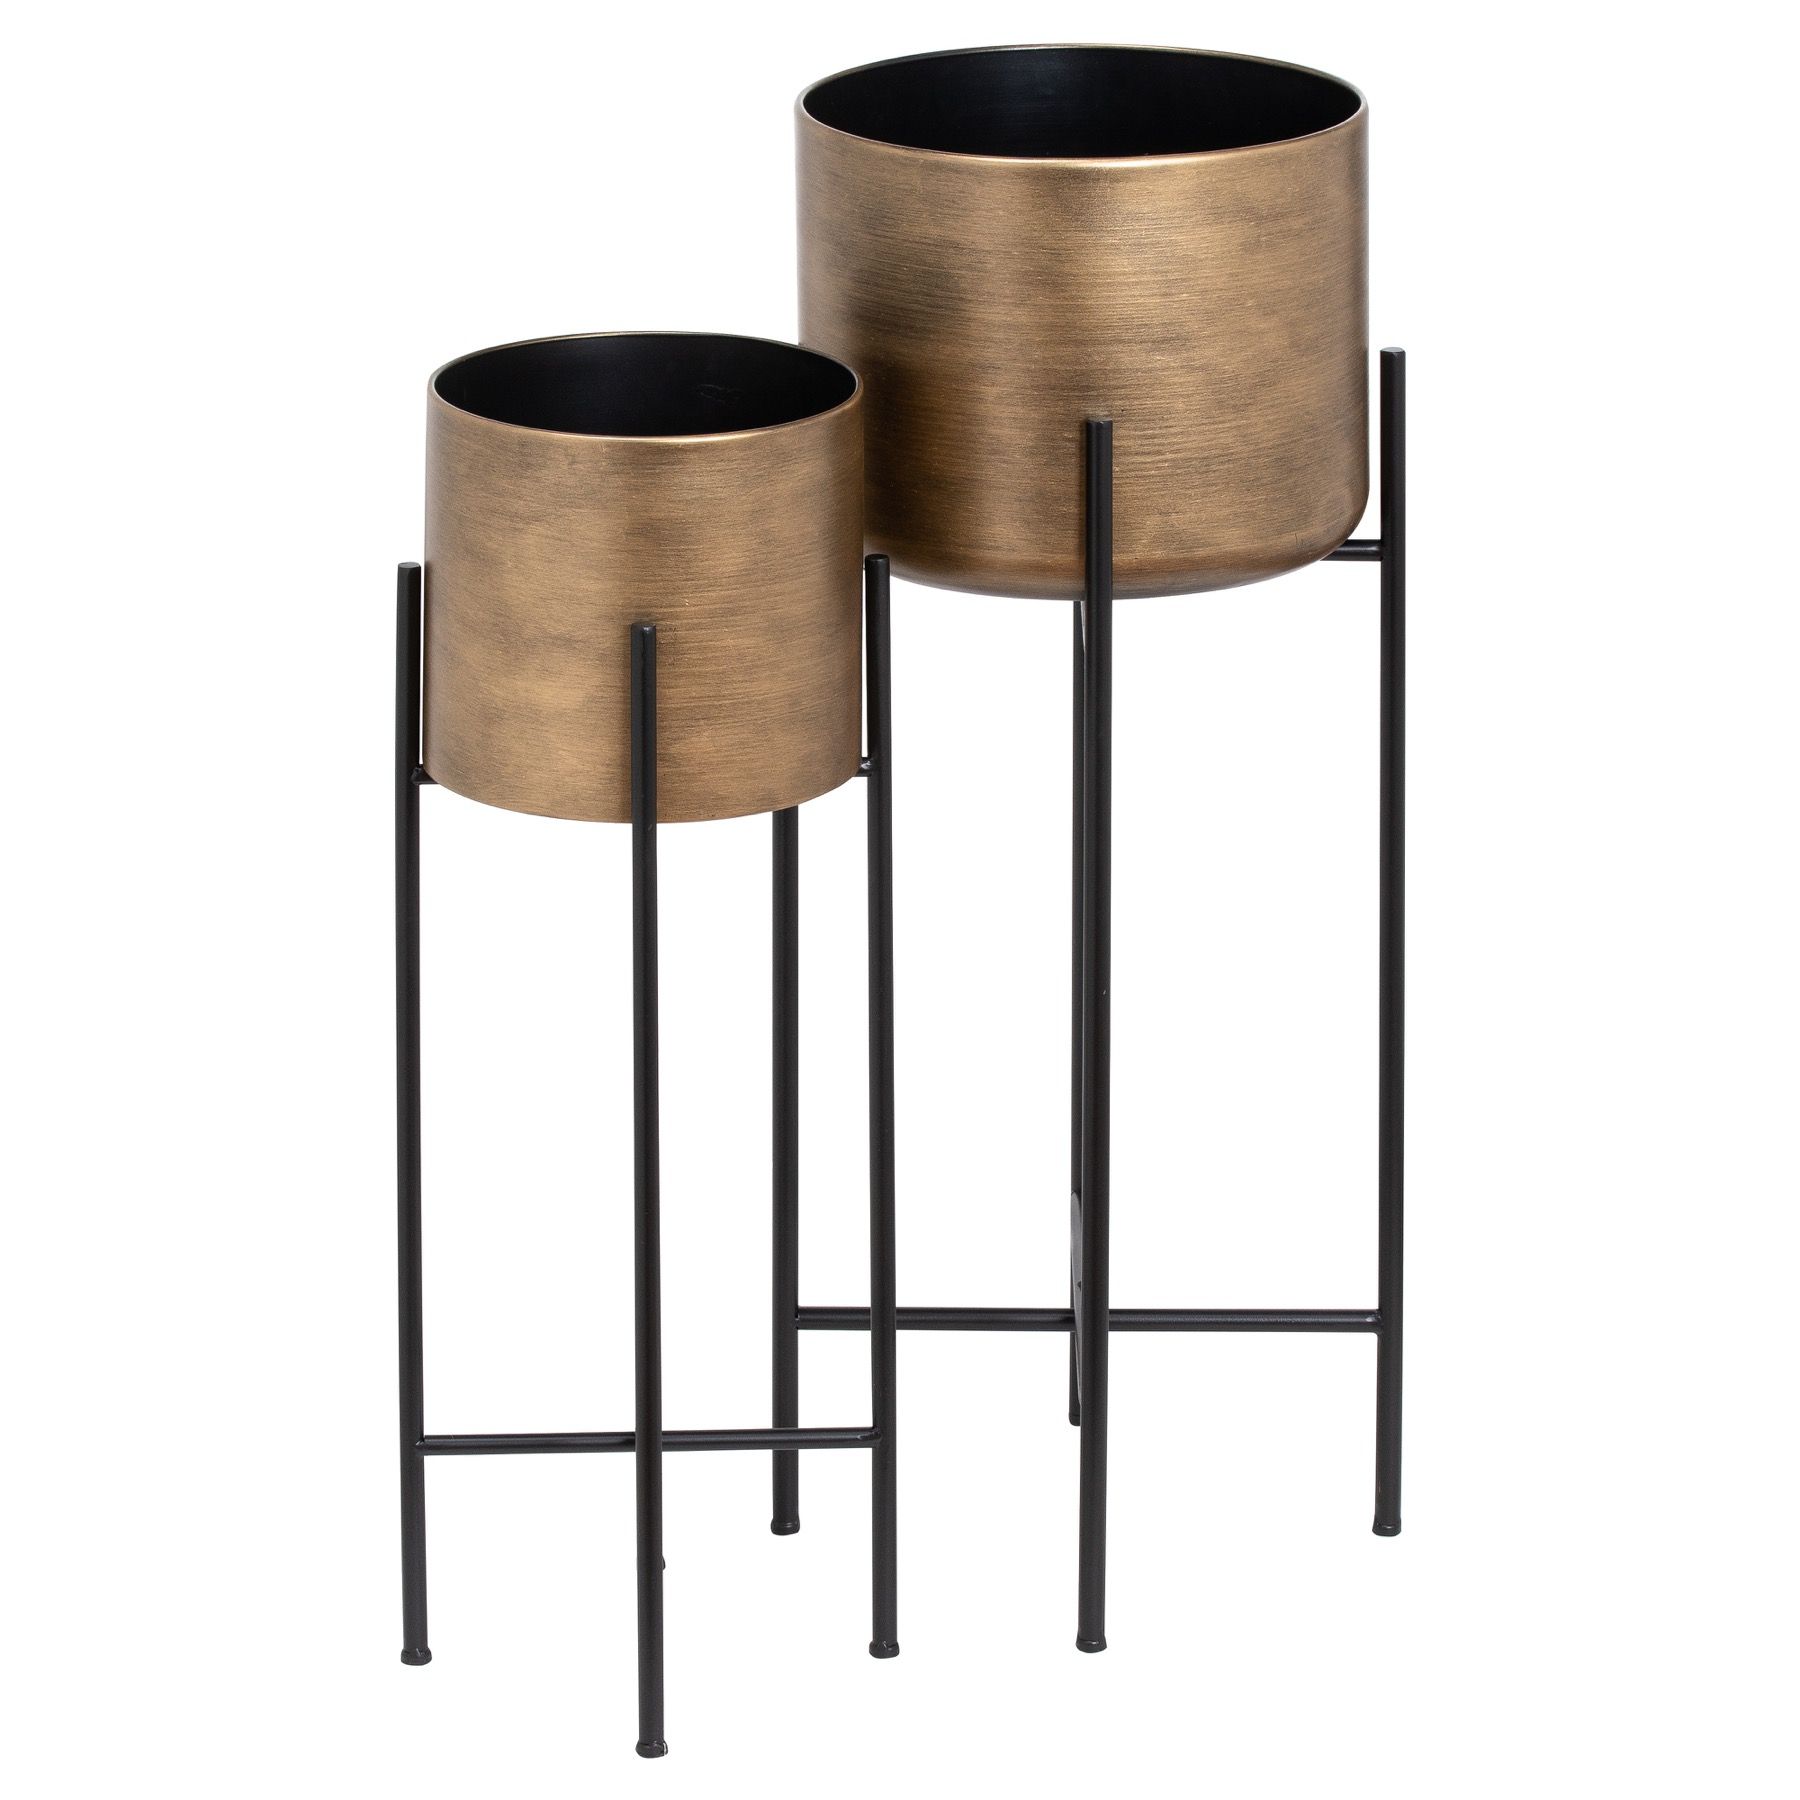 Set Of Two Bronze Planters On Stand | Wholesalehill Interiors In Bronze Small Plant Stands (View 5 of 15)